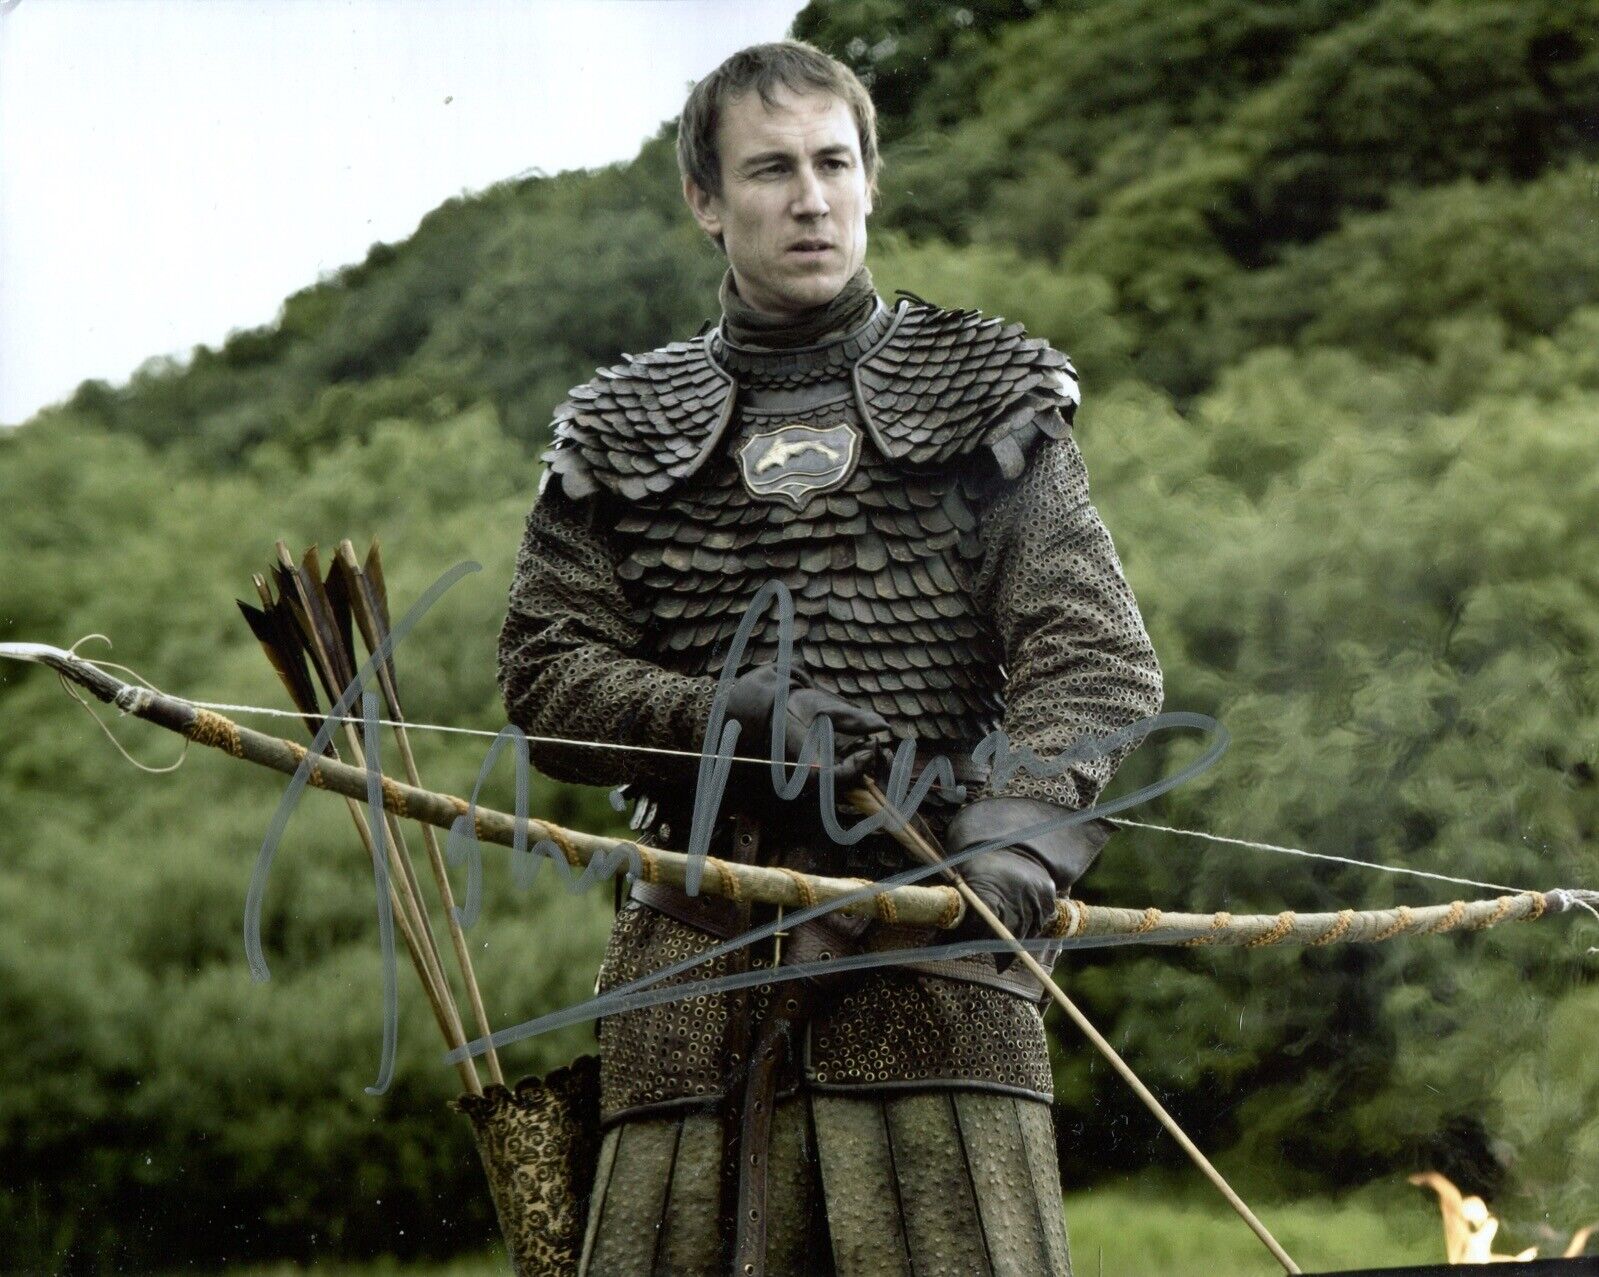 Actor Tobias Menzies signed GAME OF THRONES 8x10 Photo Poster painting - UACC DEALER